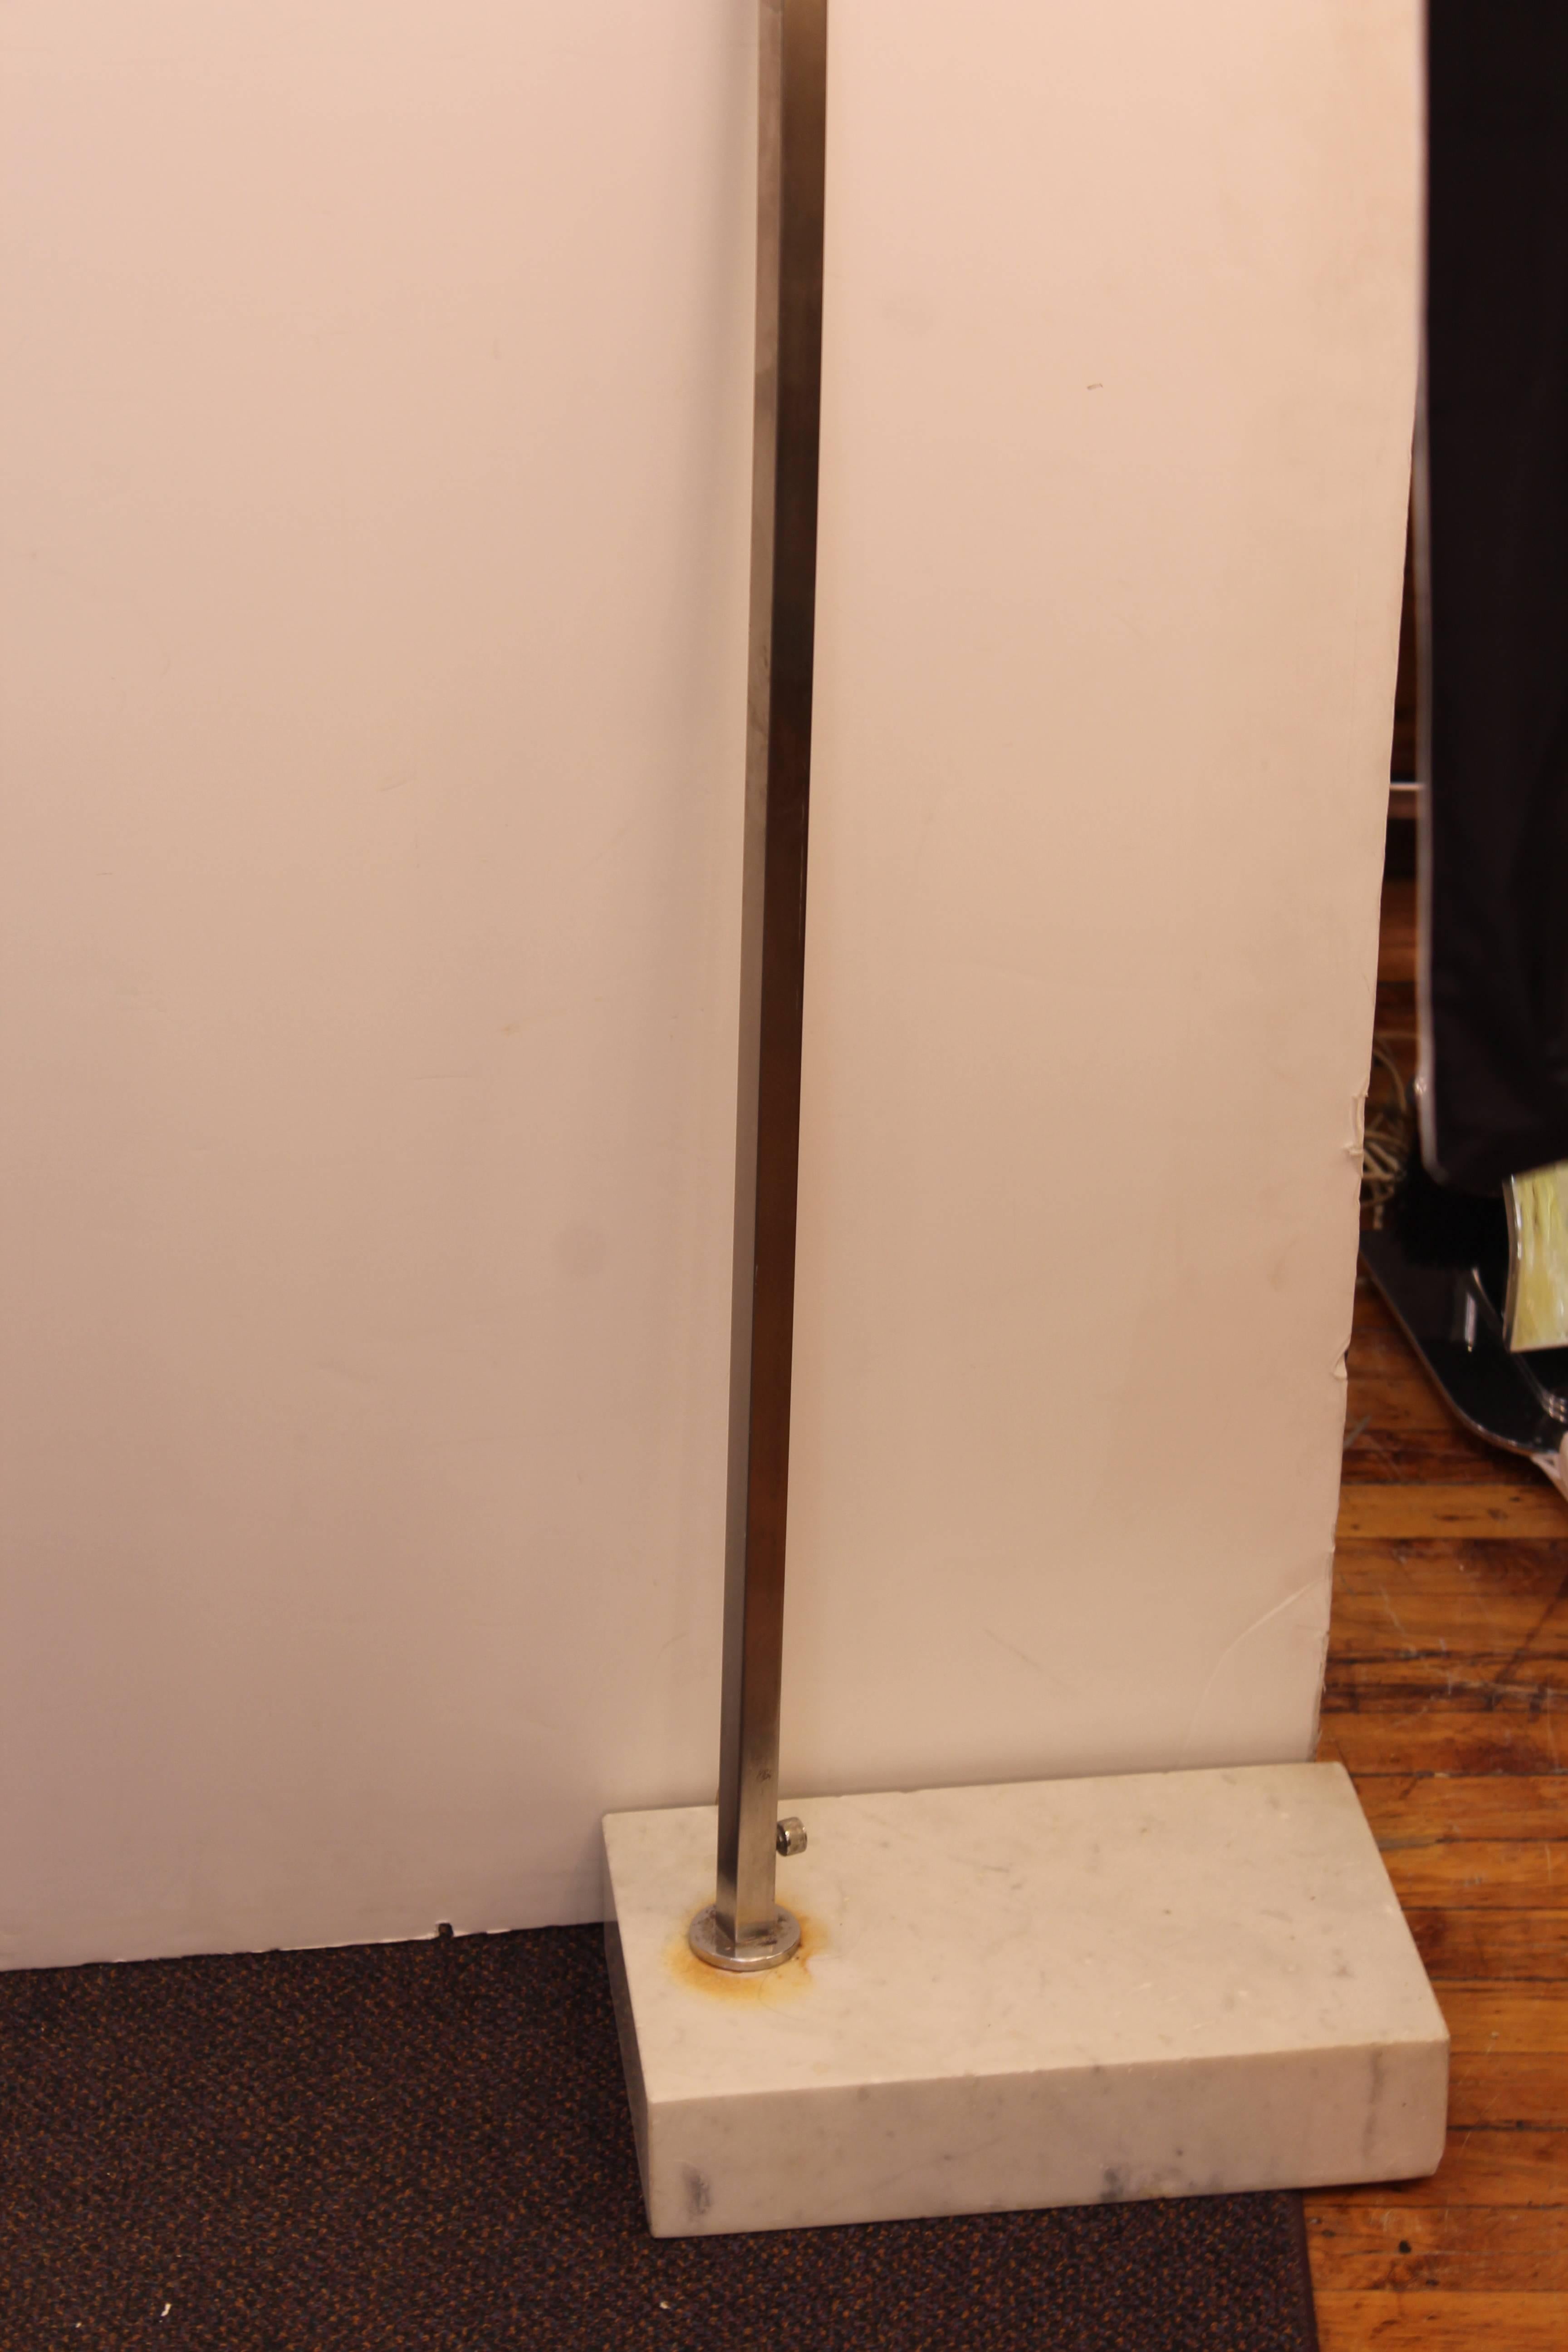 Arc floor lamp in chrome with spherical shade. Mounted on a rectangular white marble base. Wear appropriate to age and use. The piece is in good condition.

Base Dimensions: 3